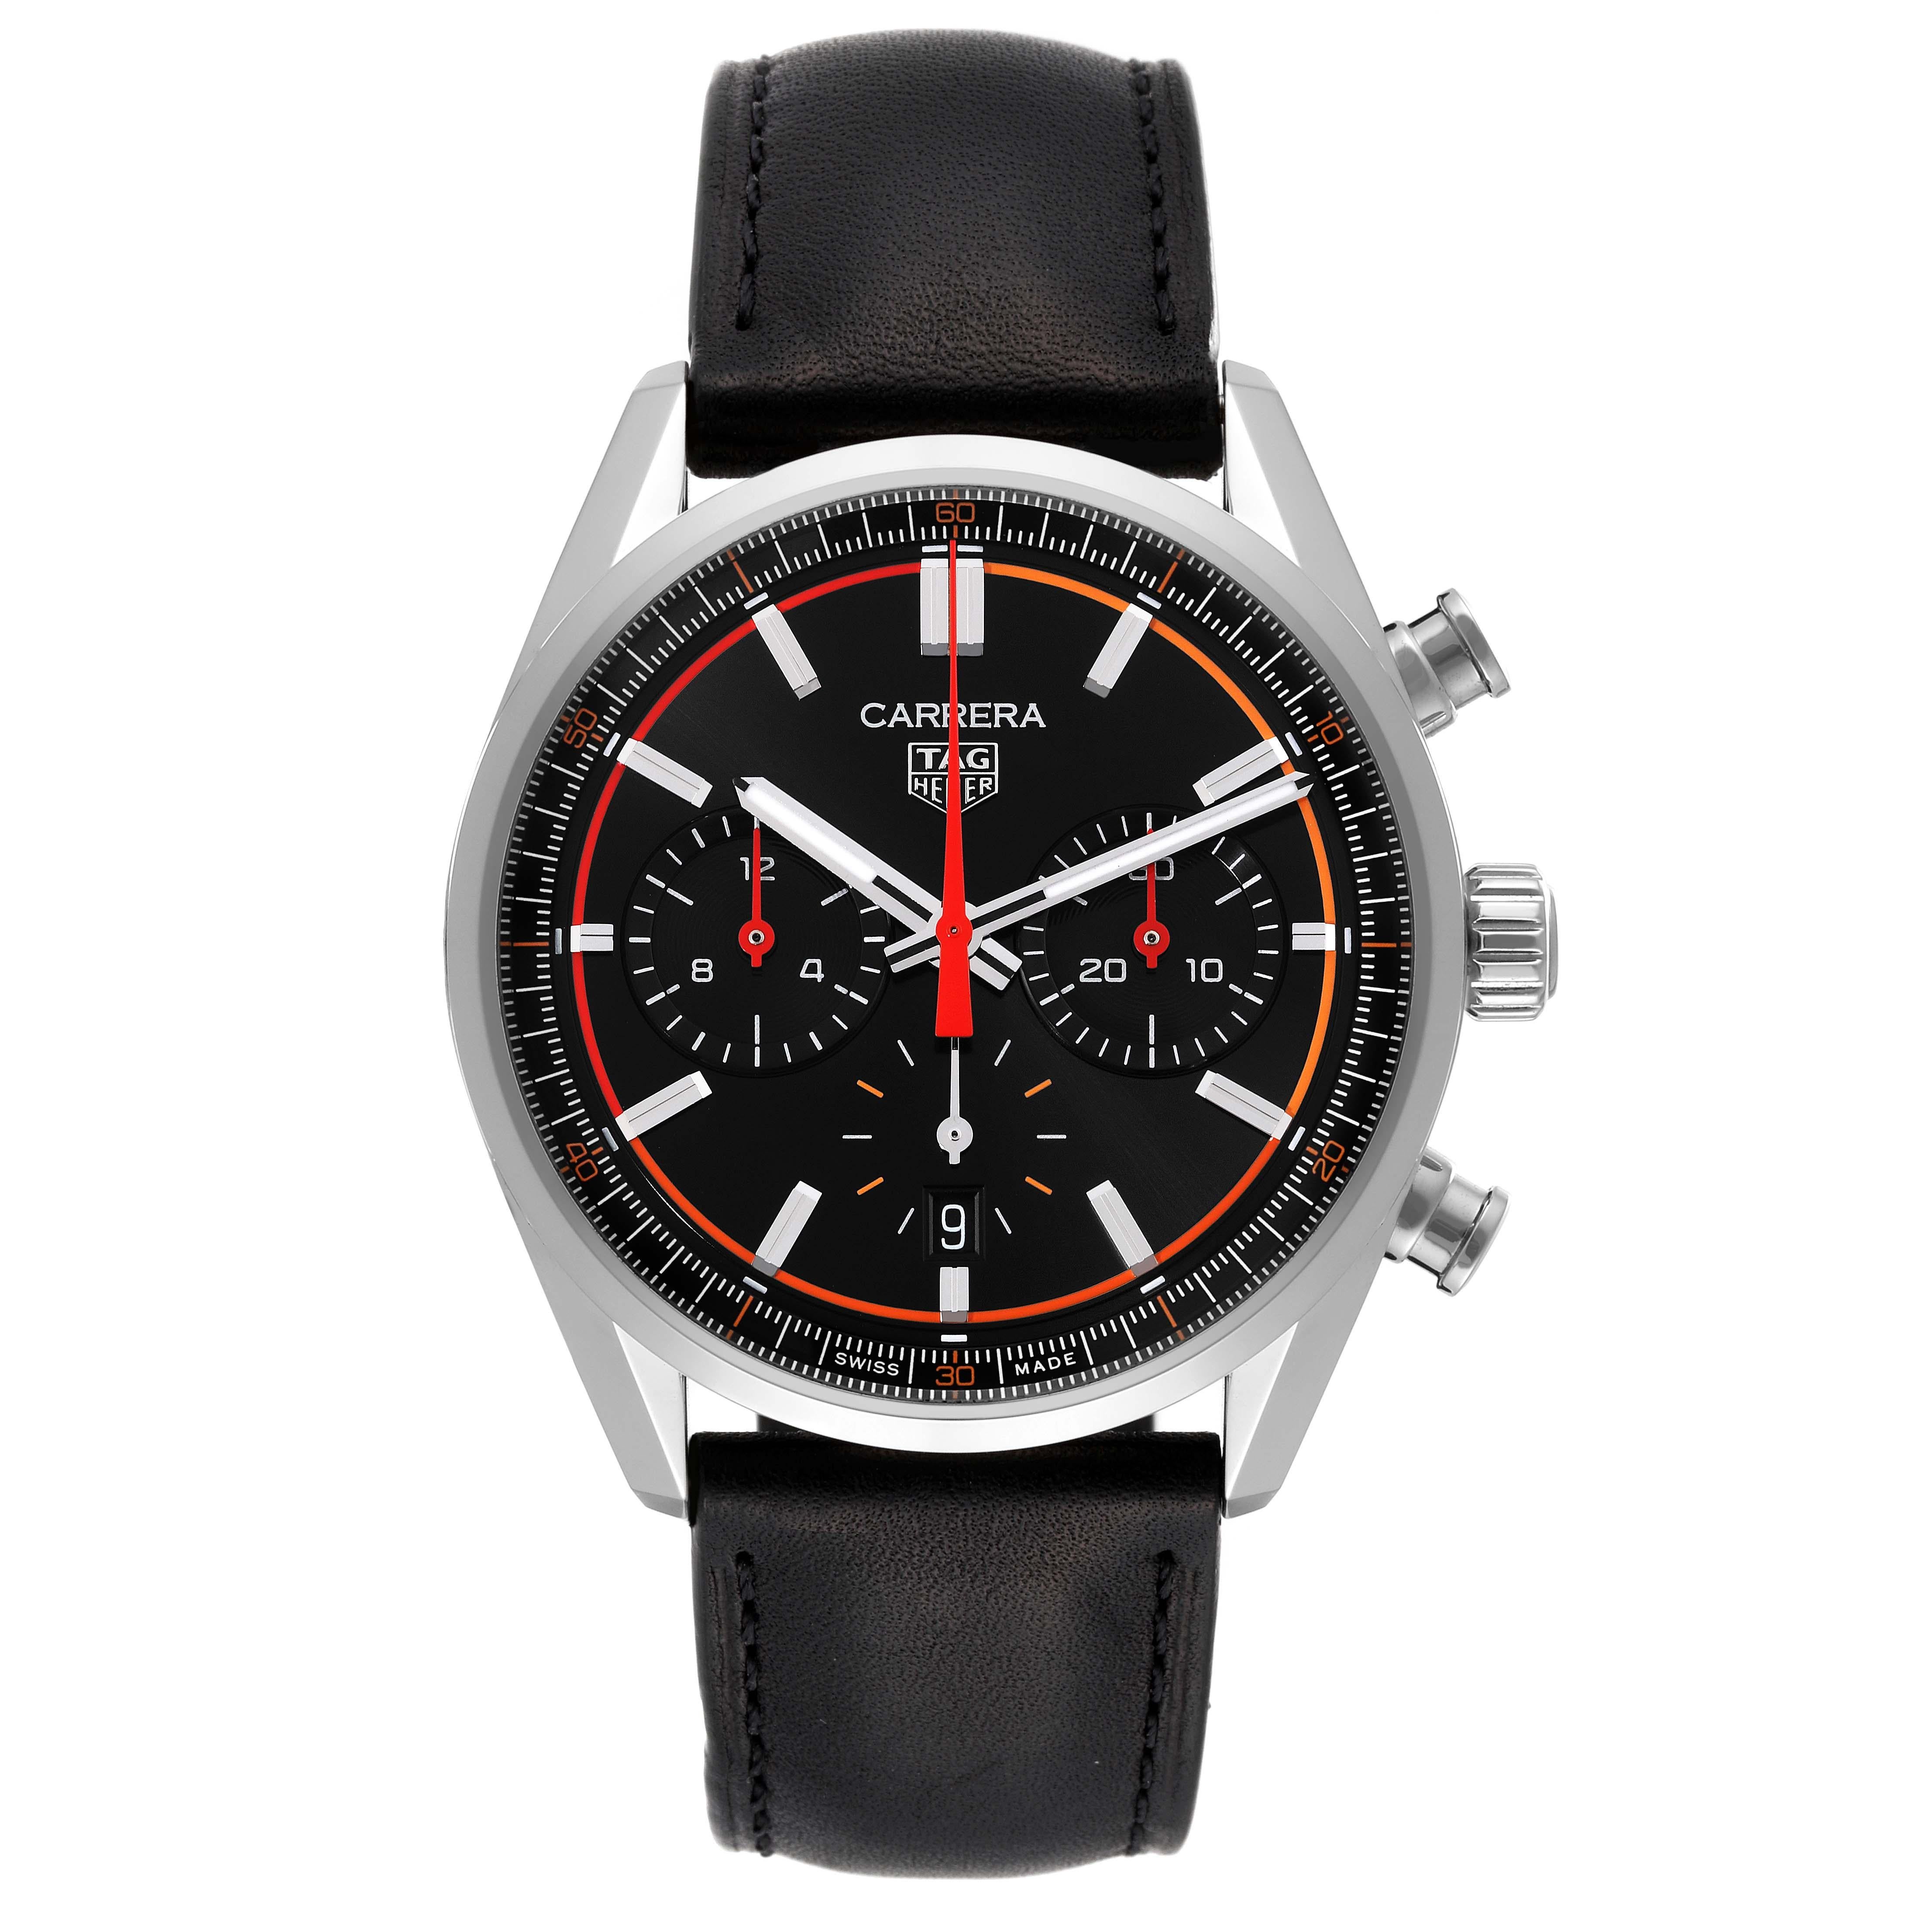 Tag Heuer Carrera Chronograph Black Dial Steel Mens Watch CBN201C Unworn. Automatic self-winding chronograph movement. Polished stainless steel case 42.0 mm in diameter. Transparent exhibition sapphire crystal case back. Polished stainless steel